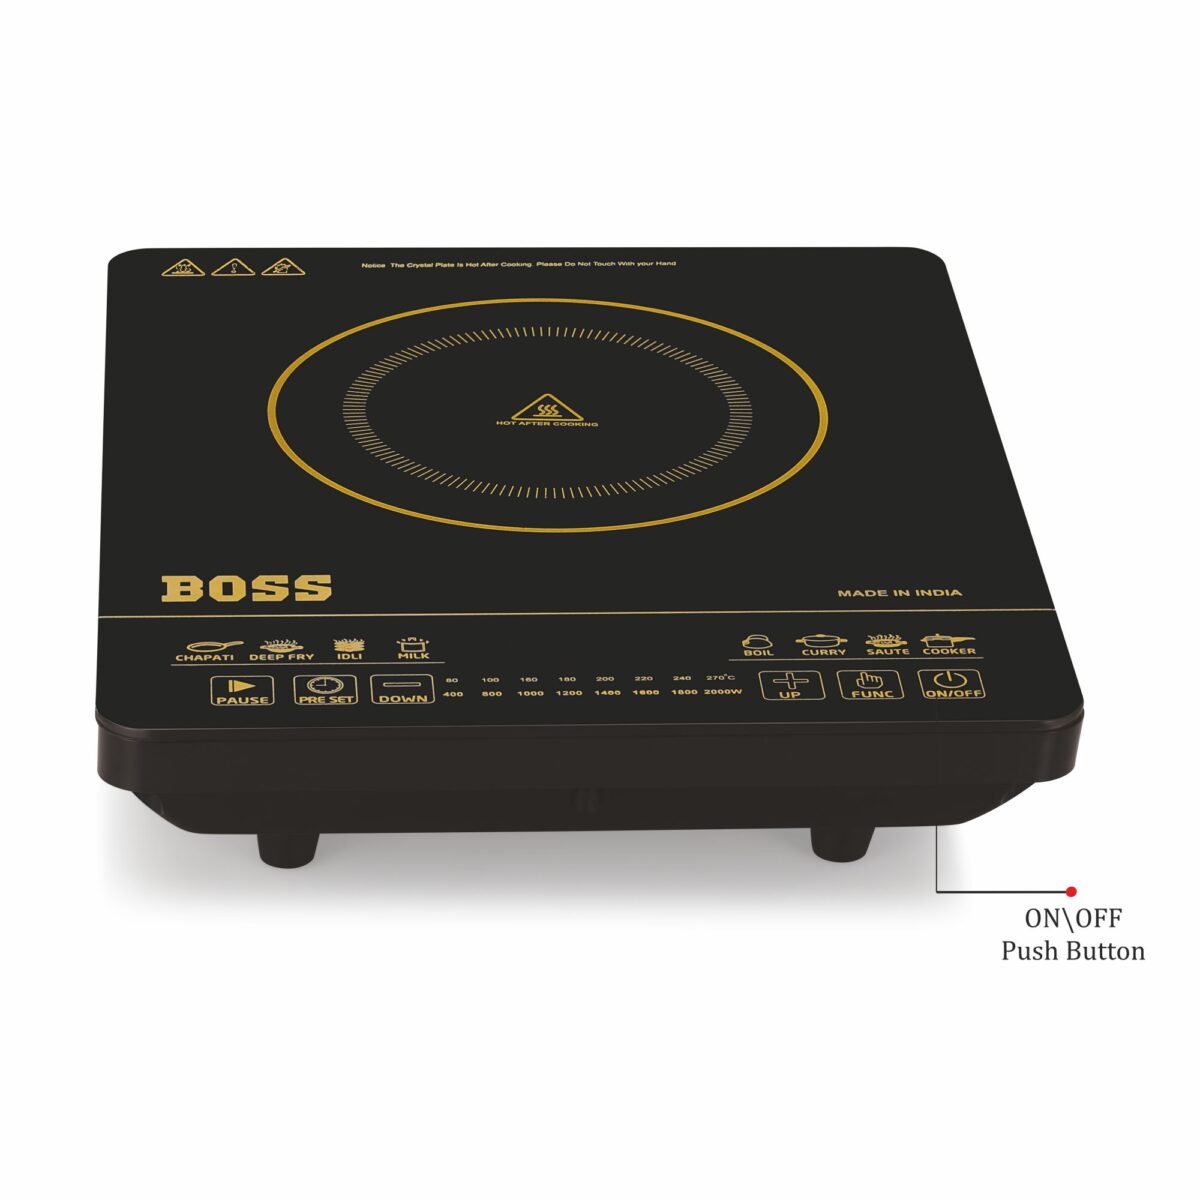 BOSS Chefmax 2000 Watts Induction Cooktop With Preset Menu Options